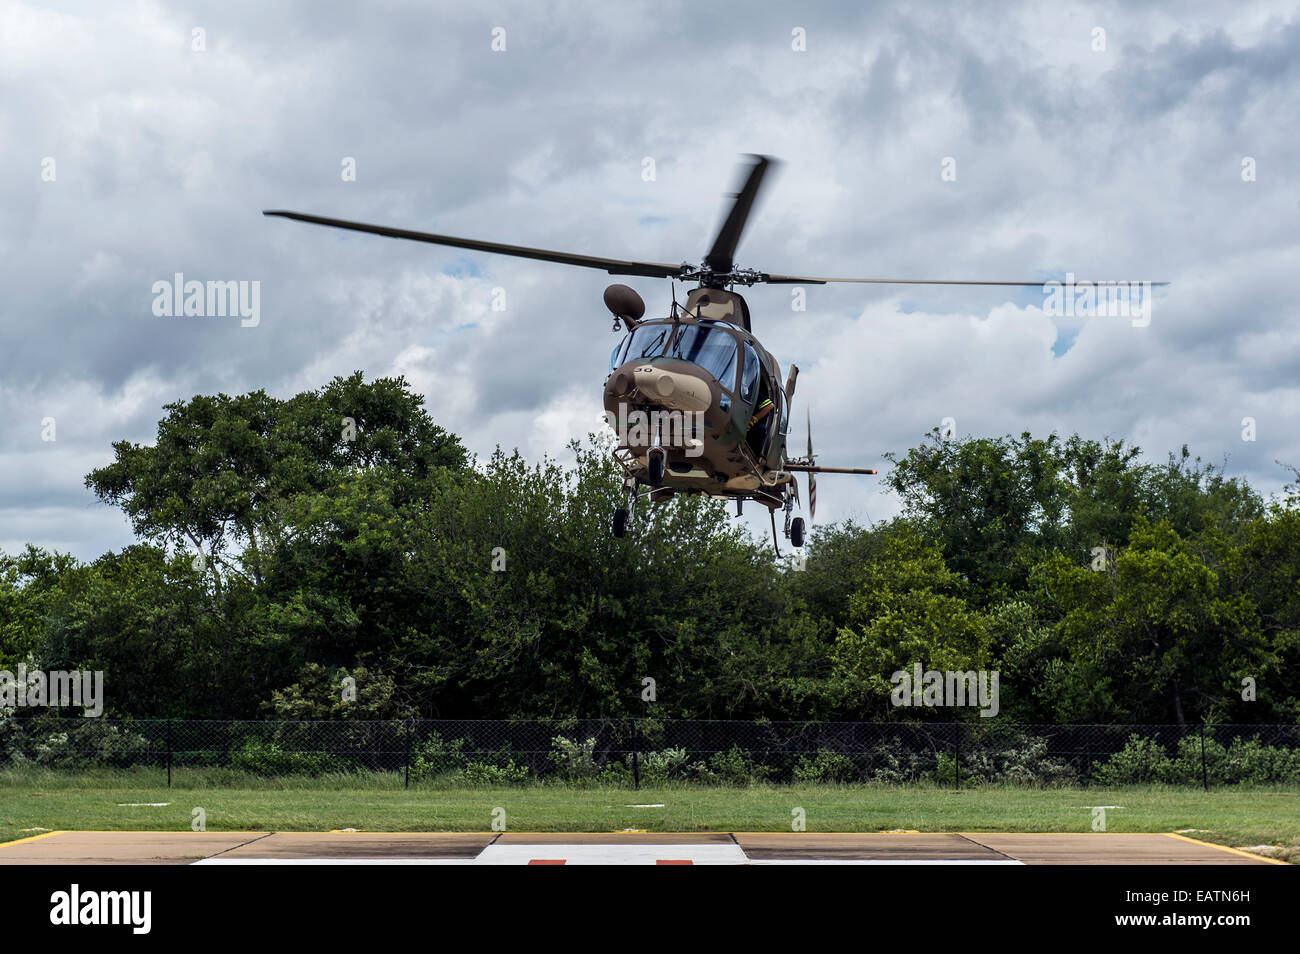 An Augusta Westland helicopter lands at an Airforce base. Stock Photo